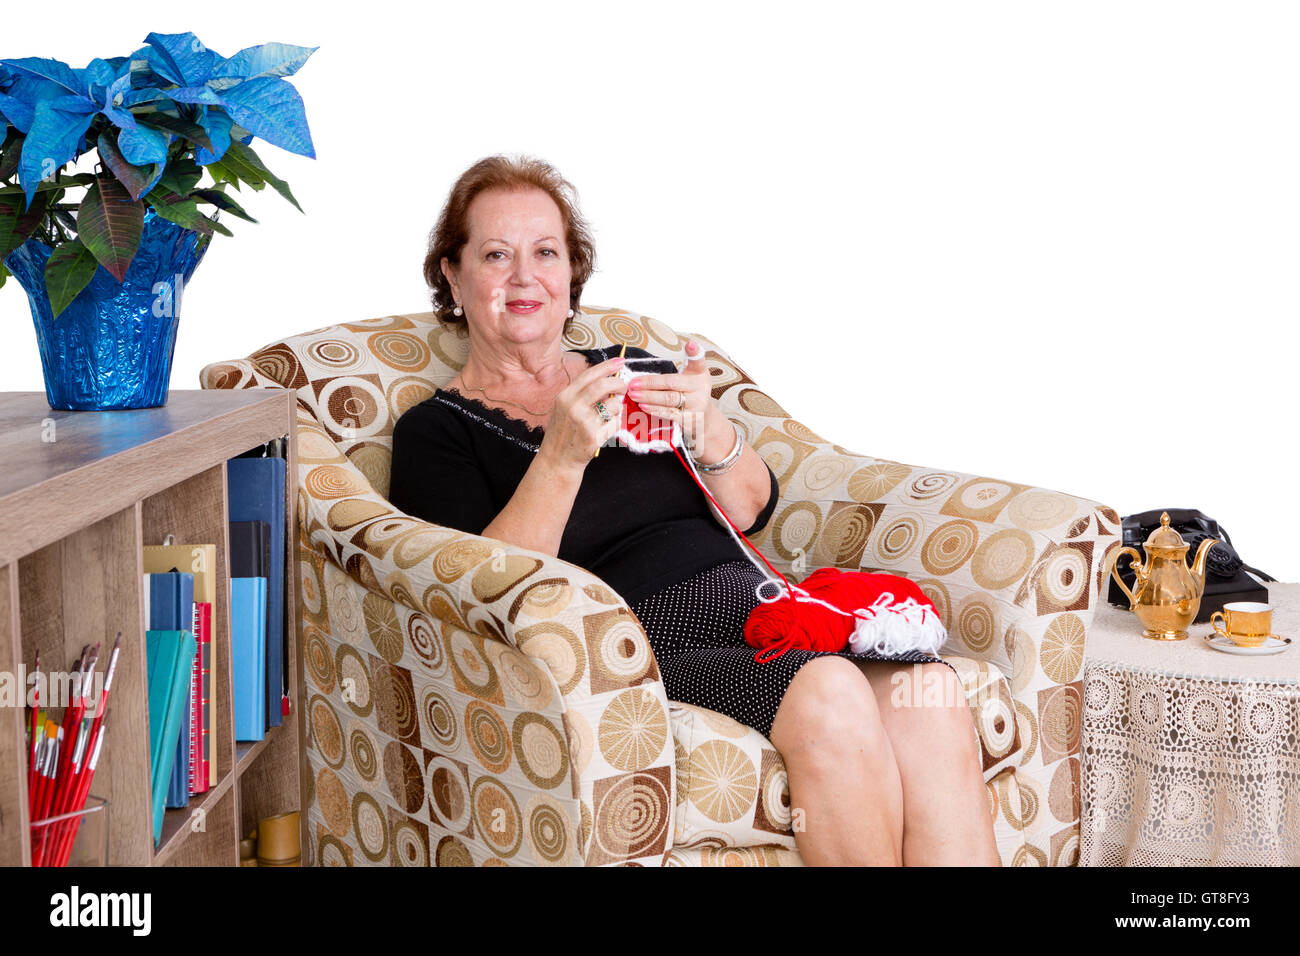 Elegant elderly lady sitting knitting at home in a comfortable armchair looking up to give the camera a friendly smile against a Stock Photo